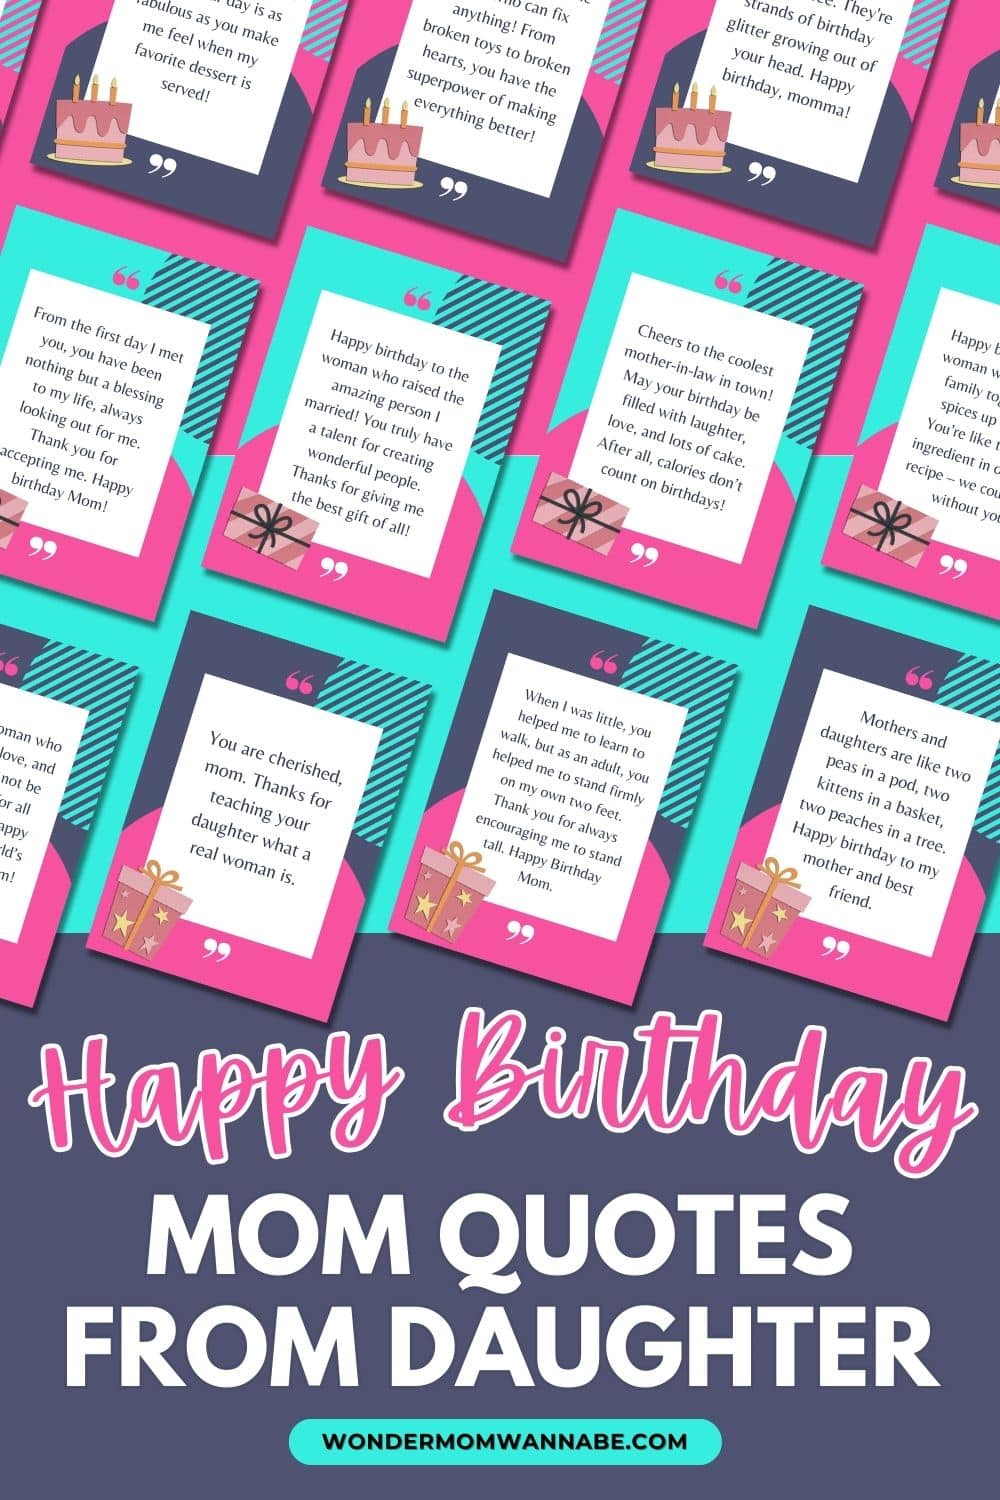 Celebrate your mom's special day with heartfelt and loving quotes from her daughter. Express your love and appreciation on her birthday with these beautiful Happy Birthday Mom Quotes from Daughter.